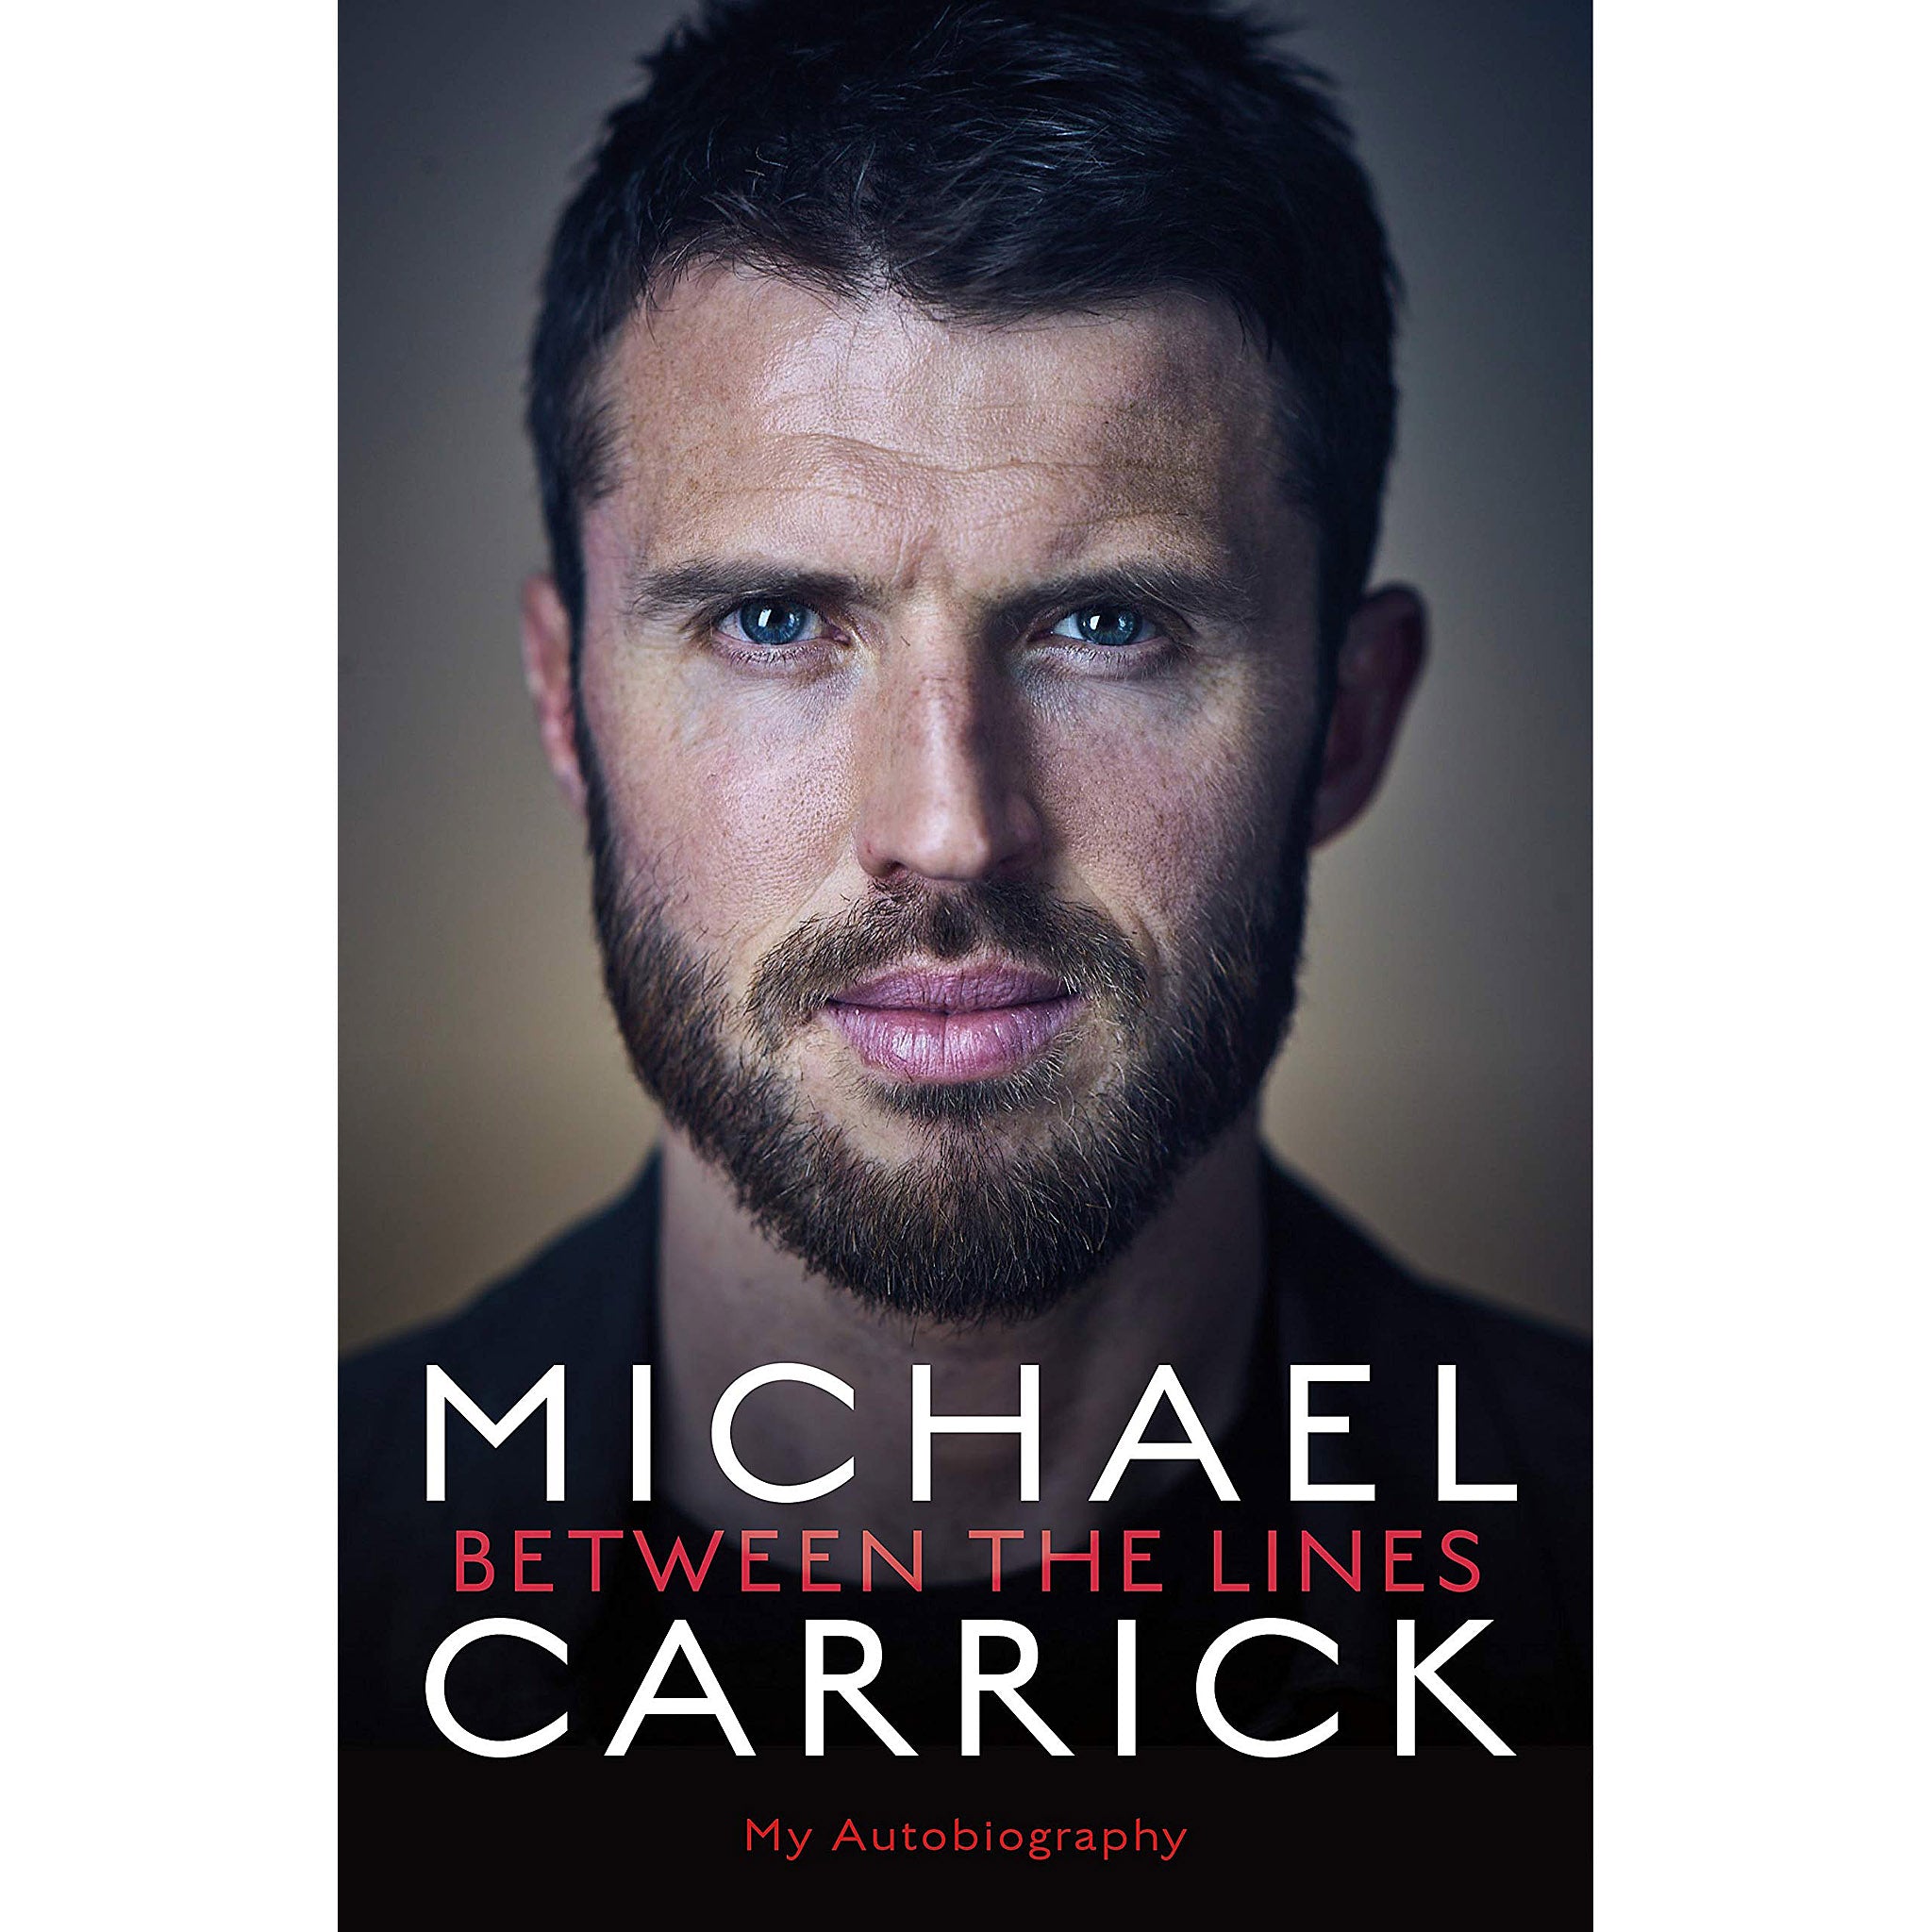 Michael Carrick – Between the Lines – My Autobiography